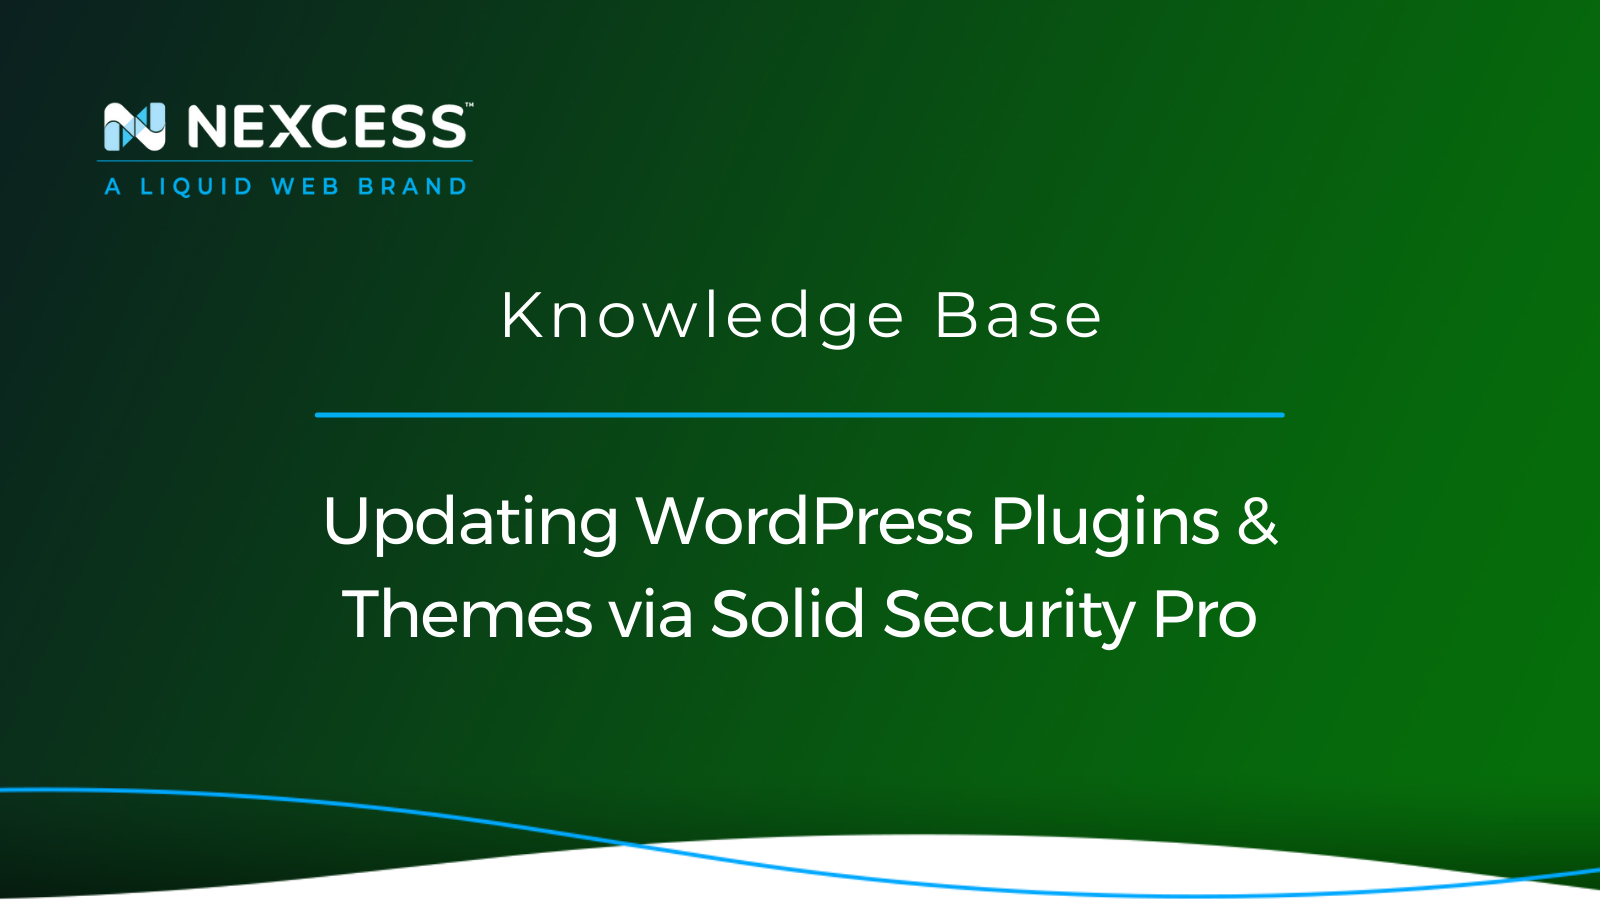 Updating WordPress Plugins & Themes via Solid Security Pro